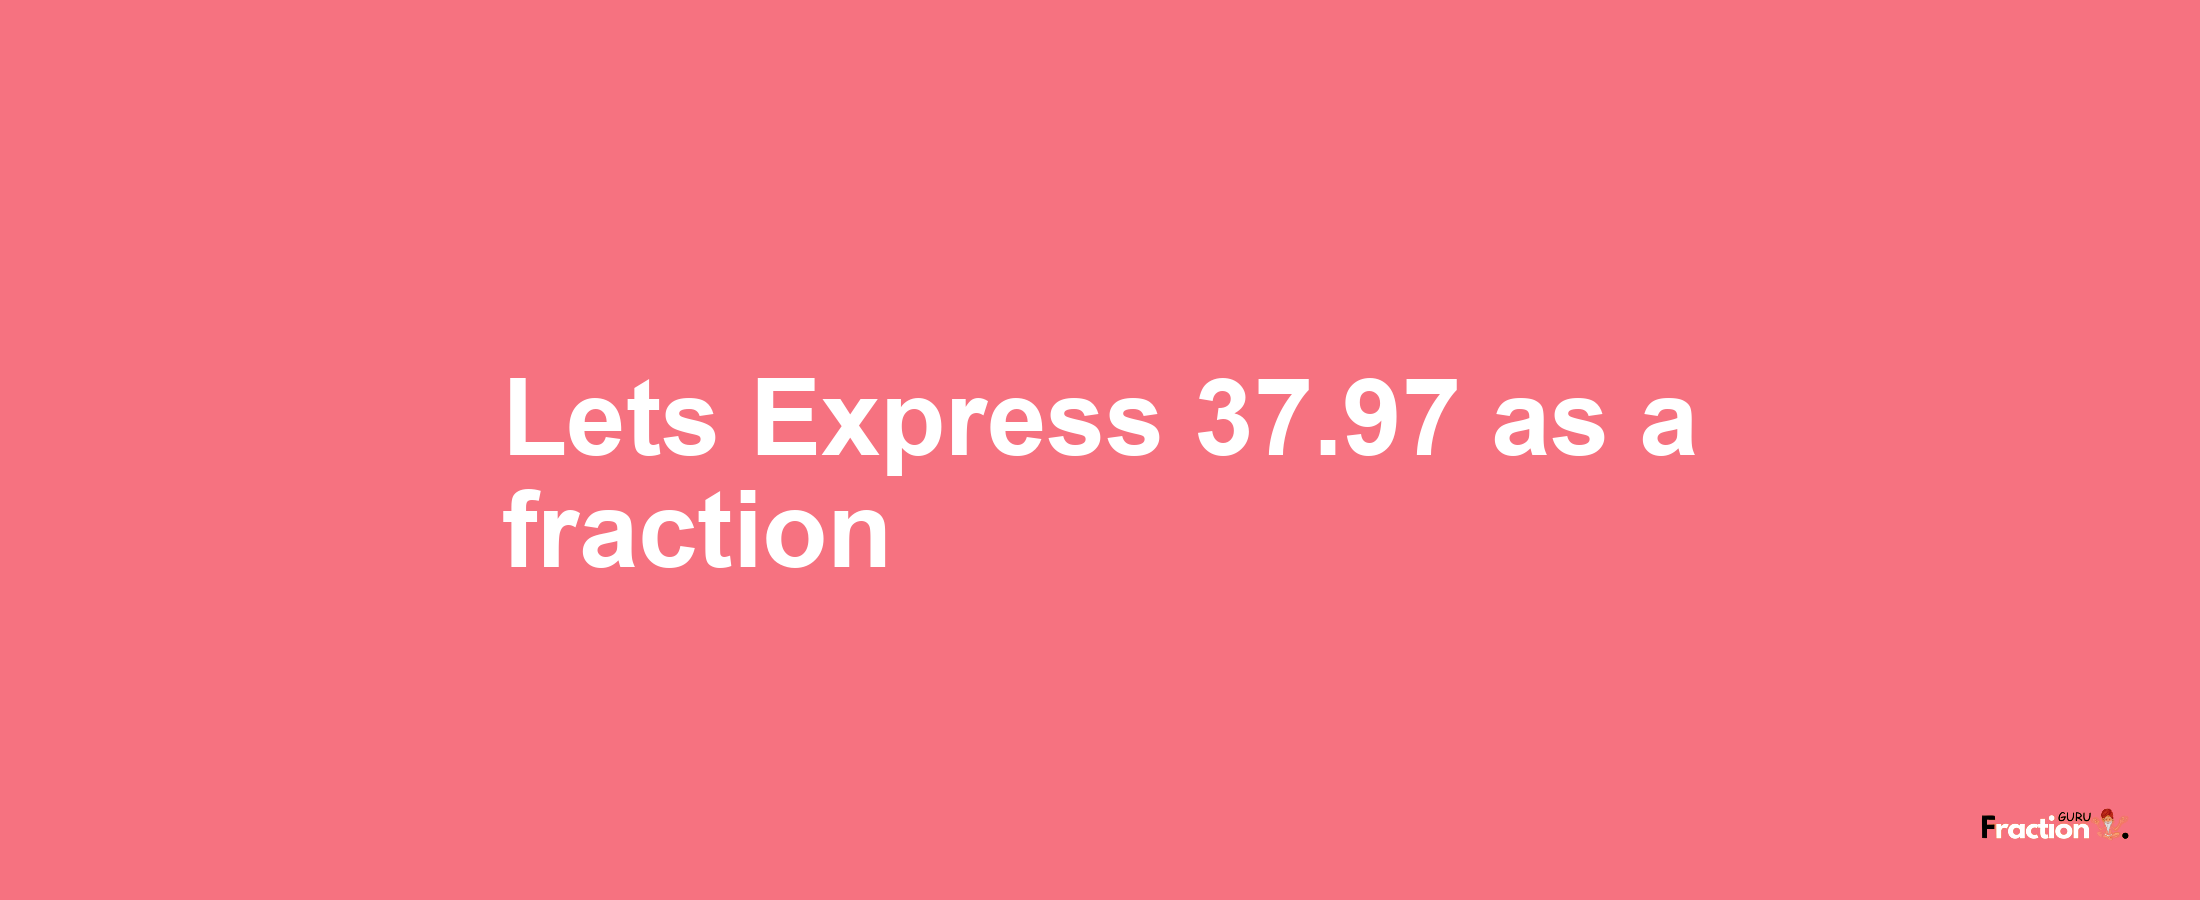 Lets Express 37.97 as afraction